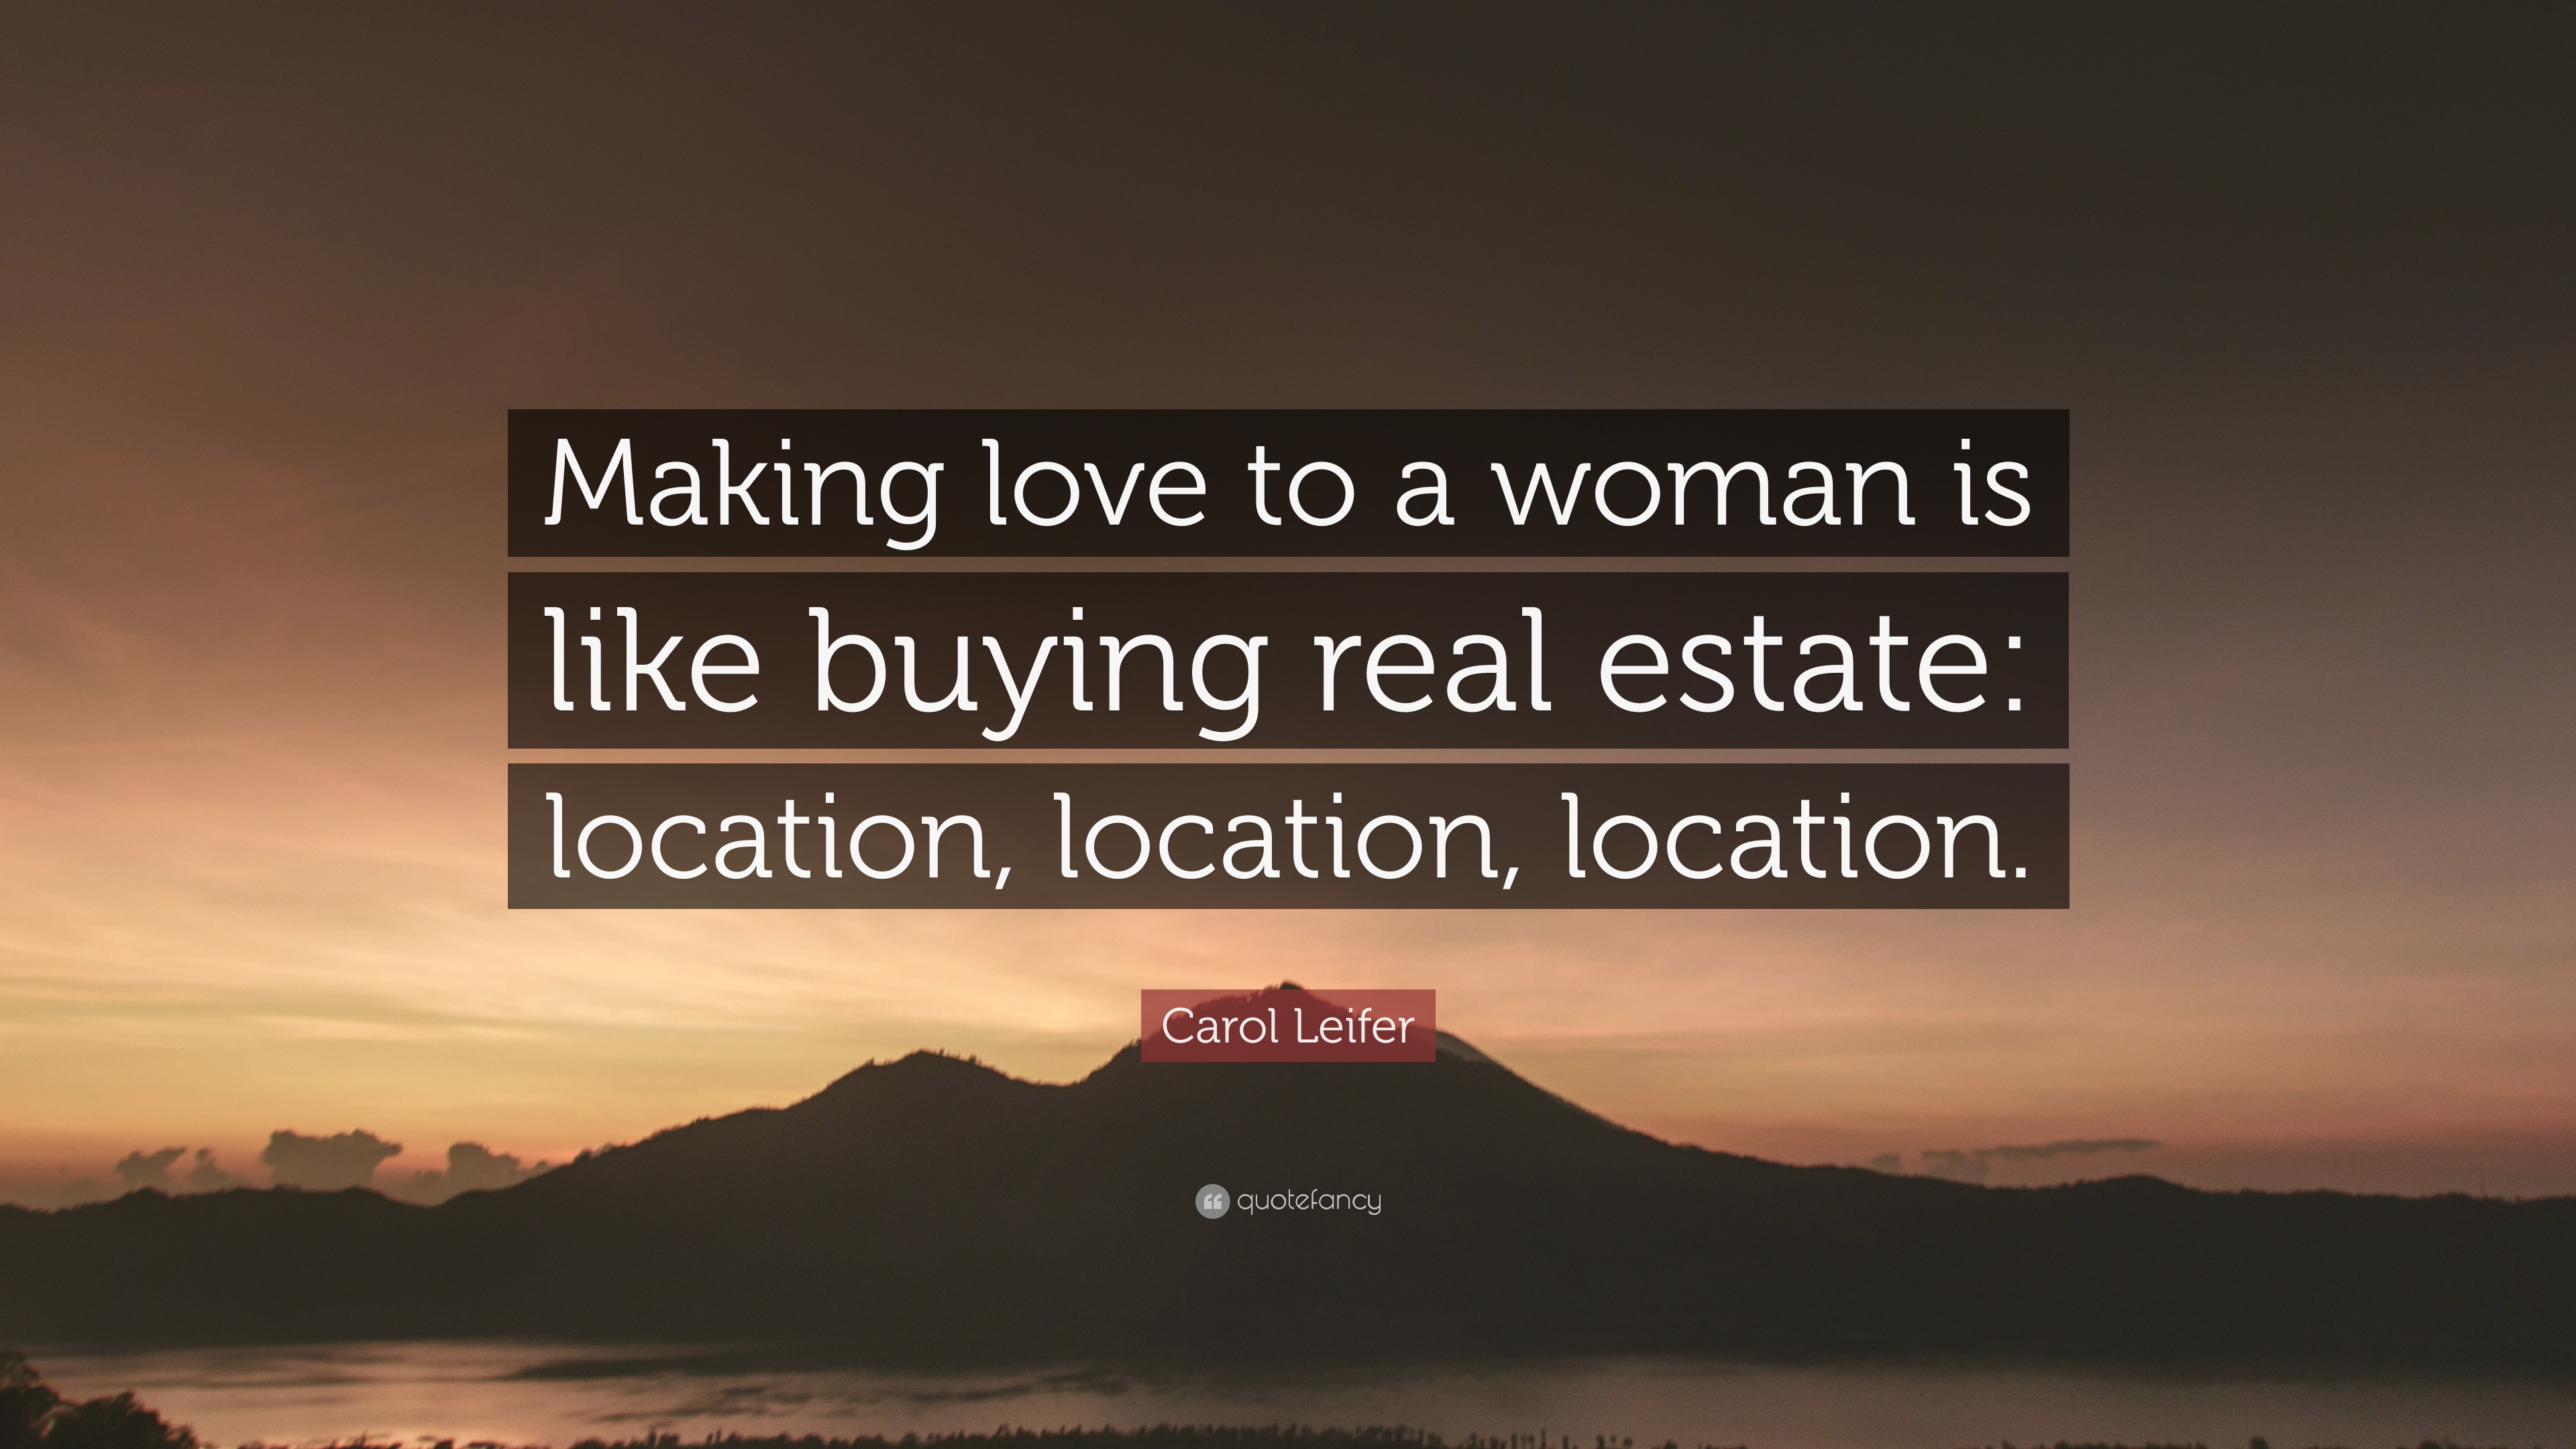 Carol Leifer Quote “Making love to a woman is like ing real estate